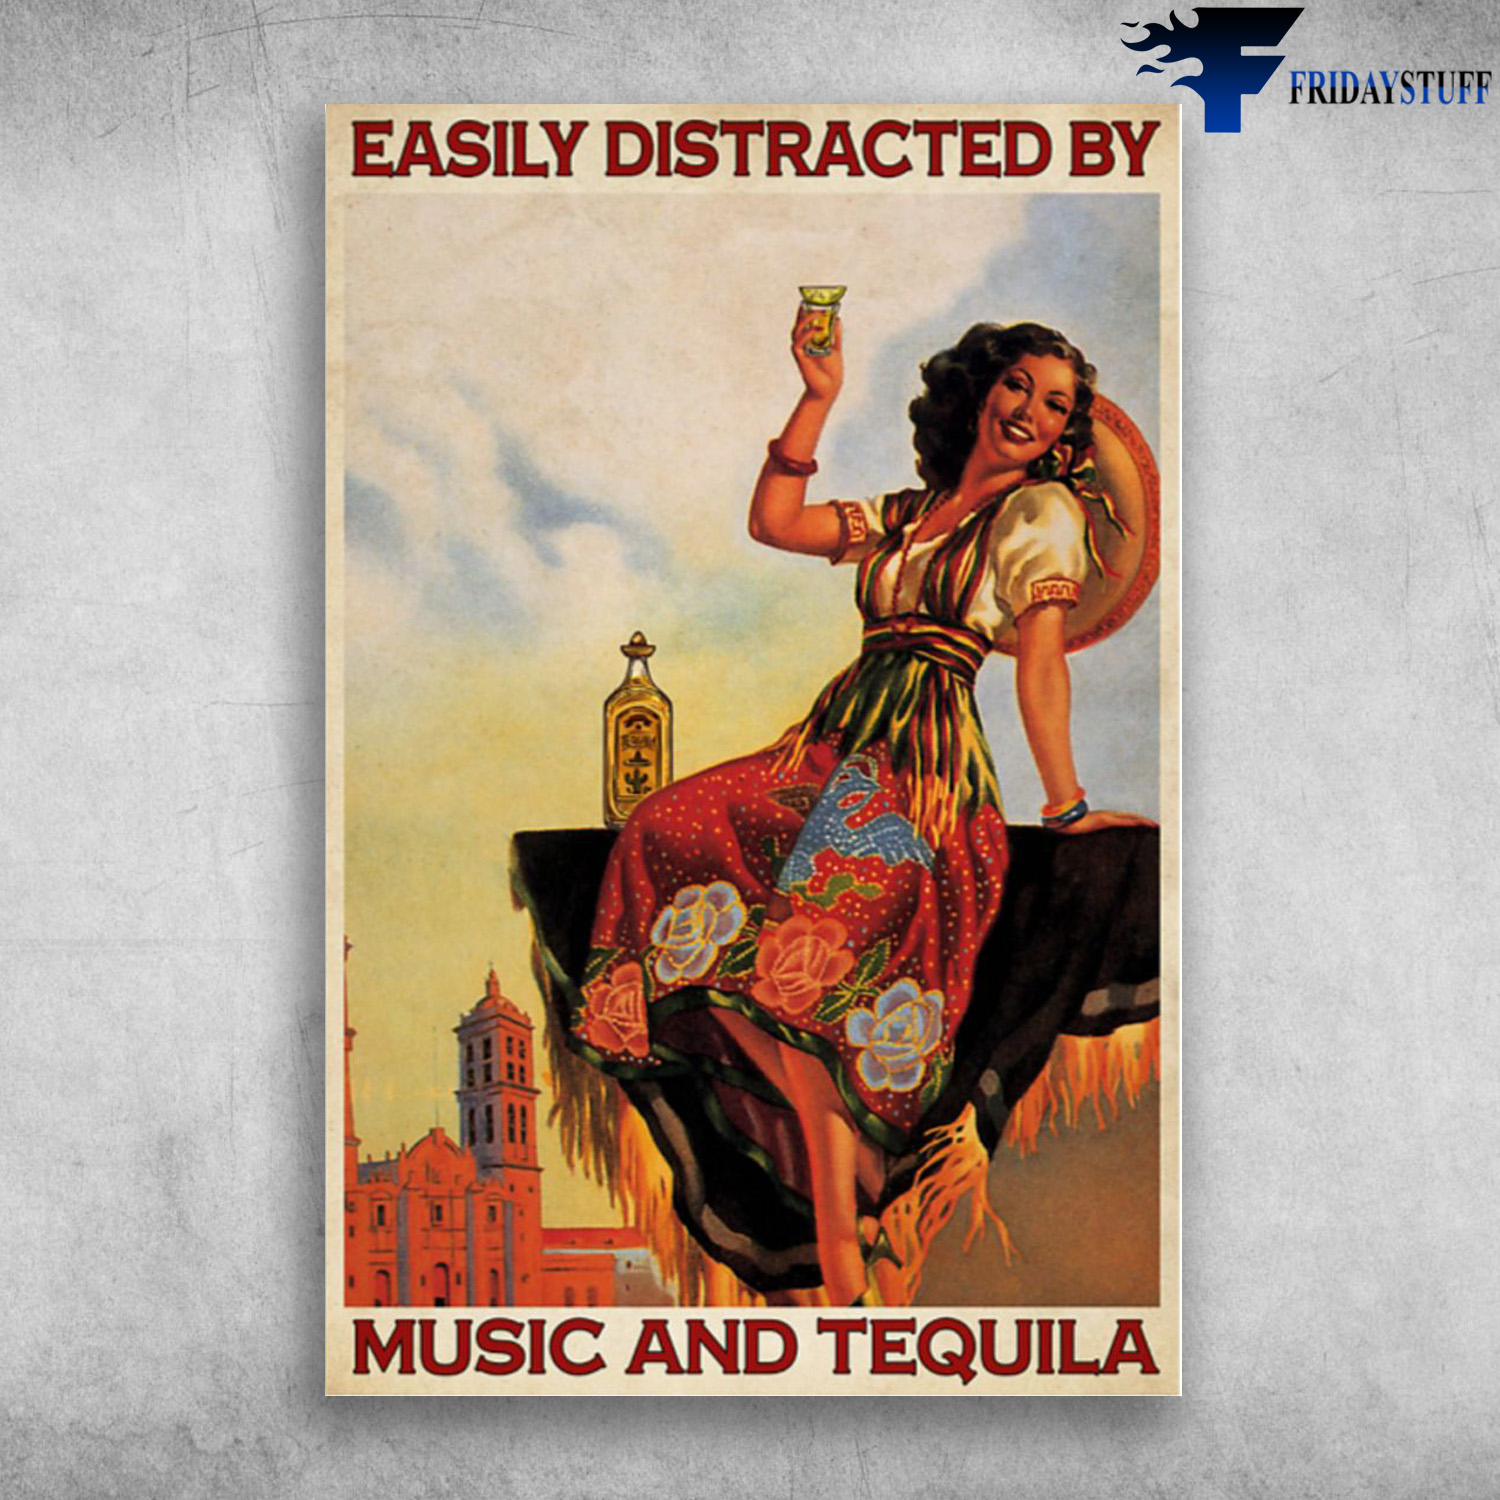 Girl Loves Music And Tequila - Easily Distracted Be Music And Tequila